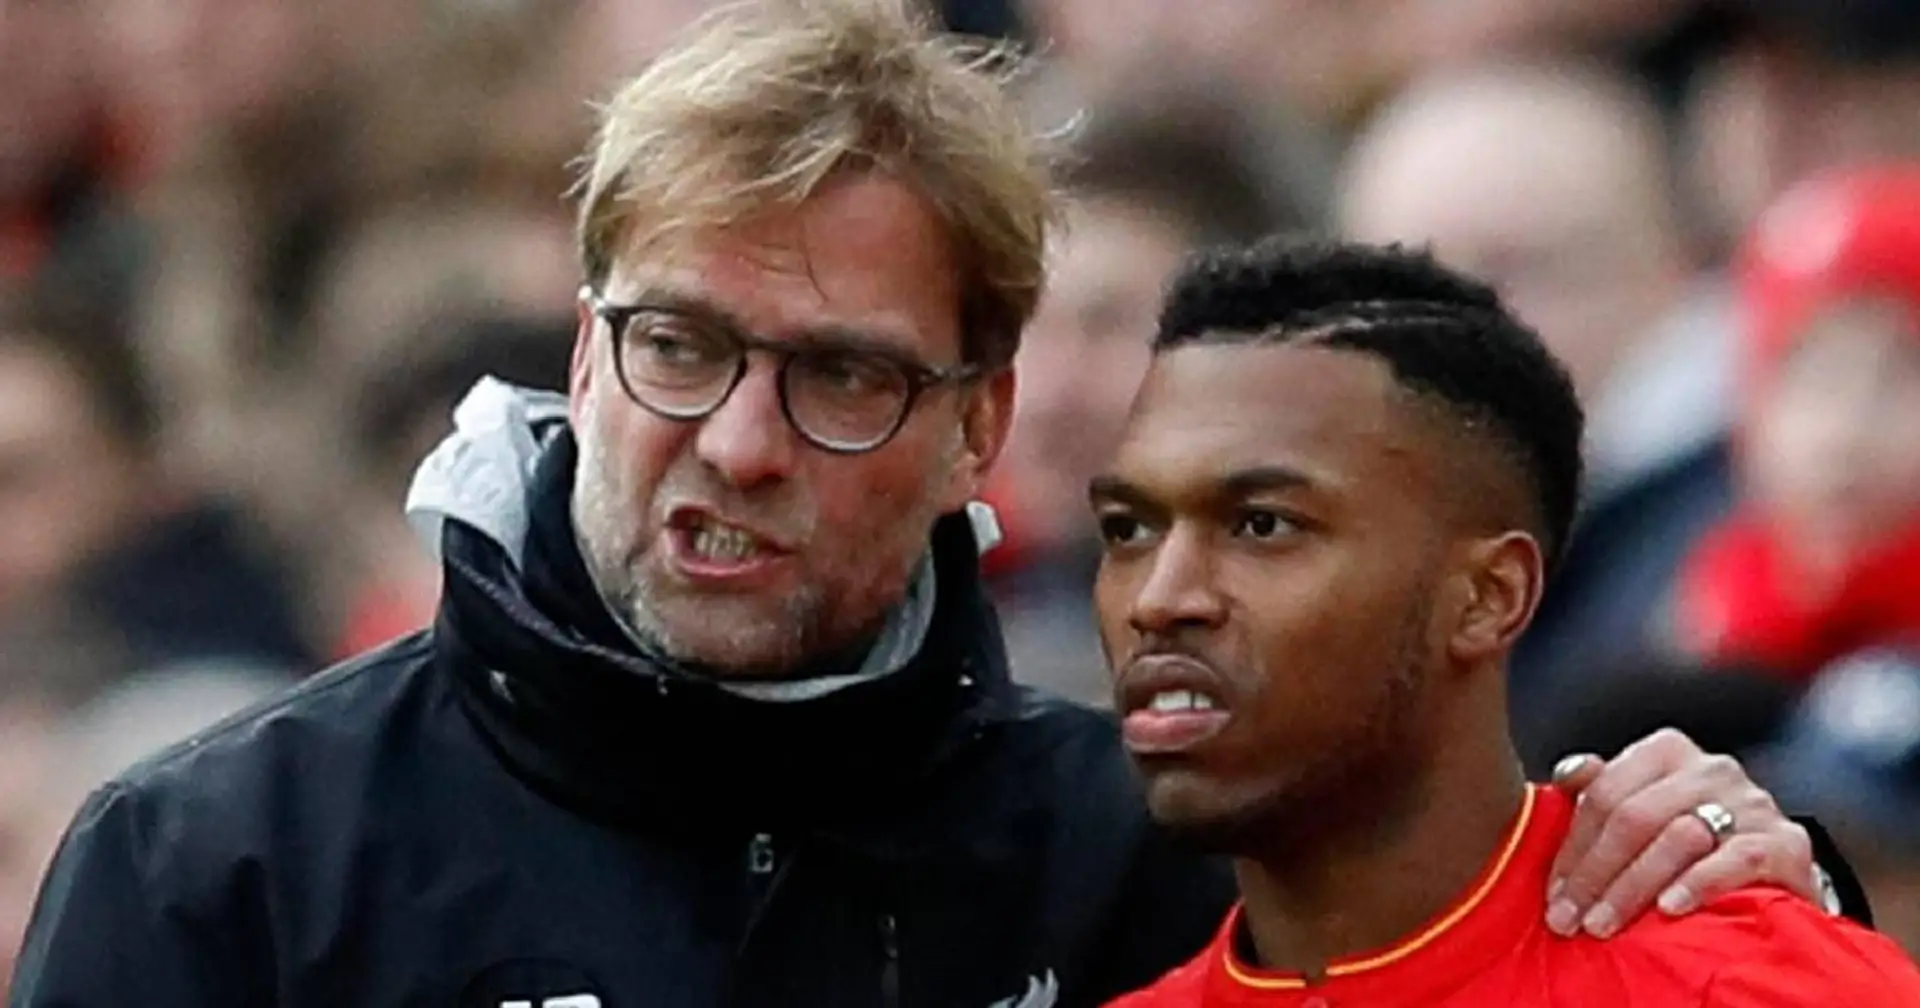 'He's different than all others': Daniel Sturridge applauds Klopp's managerial skills